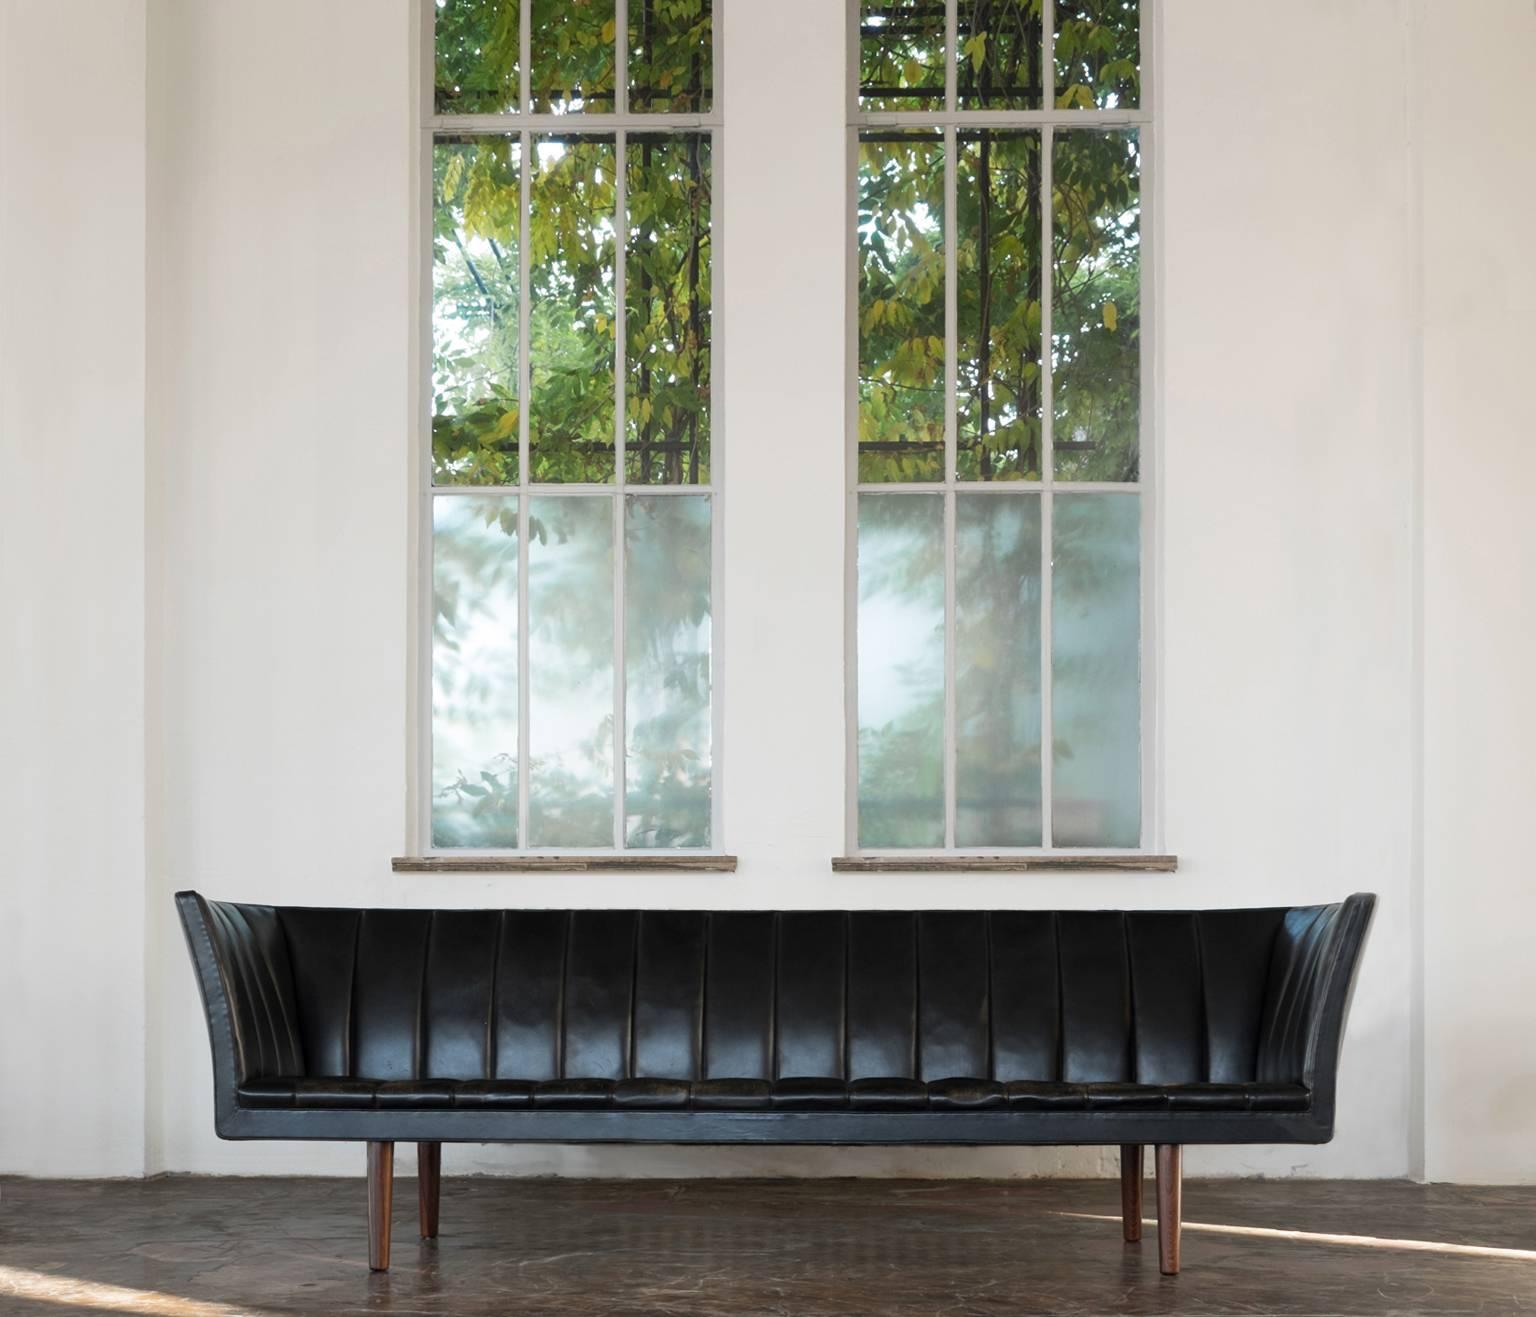 Sofa model V60, in leather and rosewood, by Helge Vestergaard Jensen for Peder Pederson, Denmark 1960. 

Rare three-seat sofa in black leather. High on its tapered rosewood legs, this sofa is a beautiful sight to behold. Upholstered in black